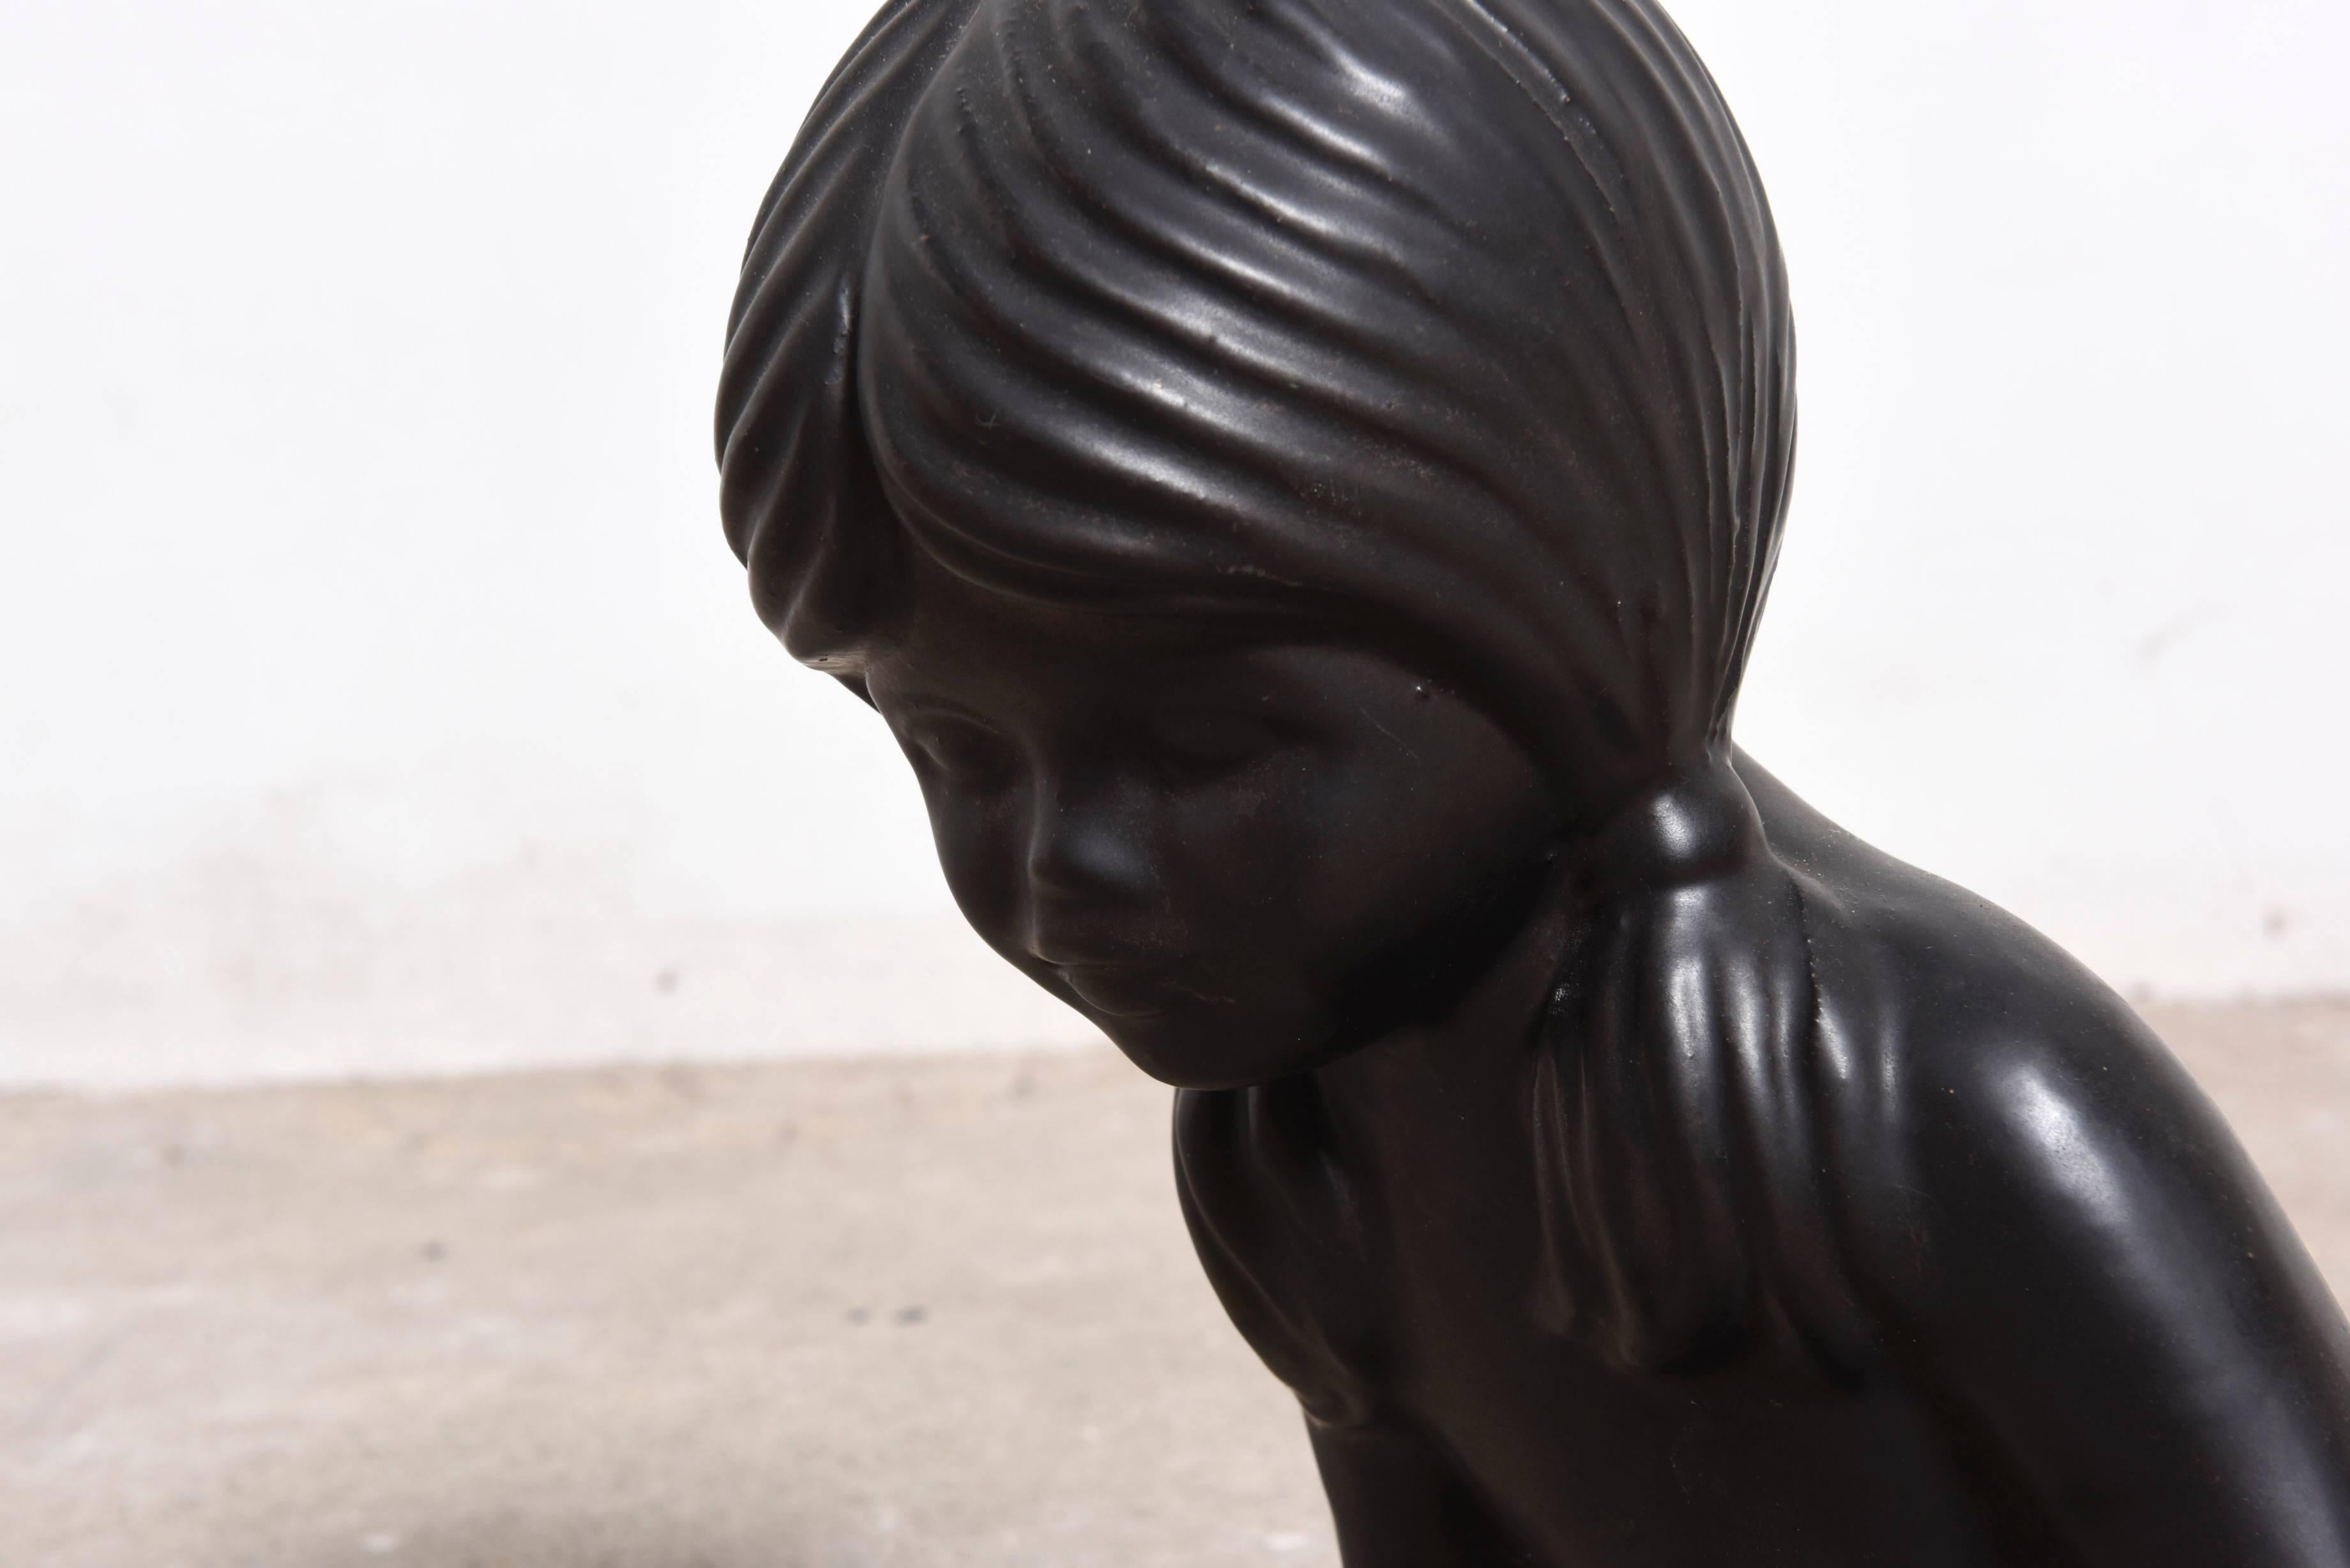 Molded Ceramic Sculpture of a Young Girl by Elie van Damme for Amphora